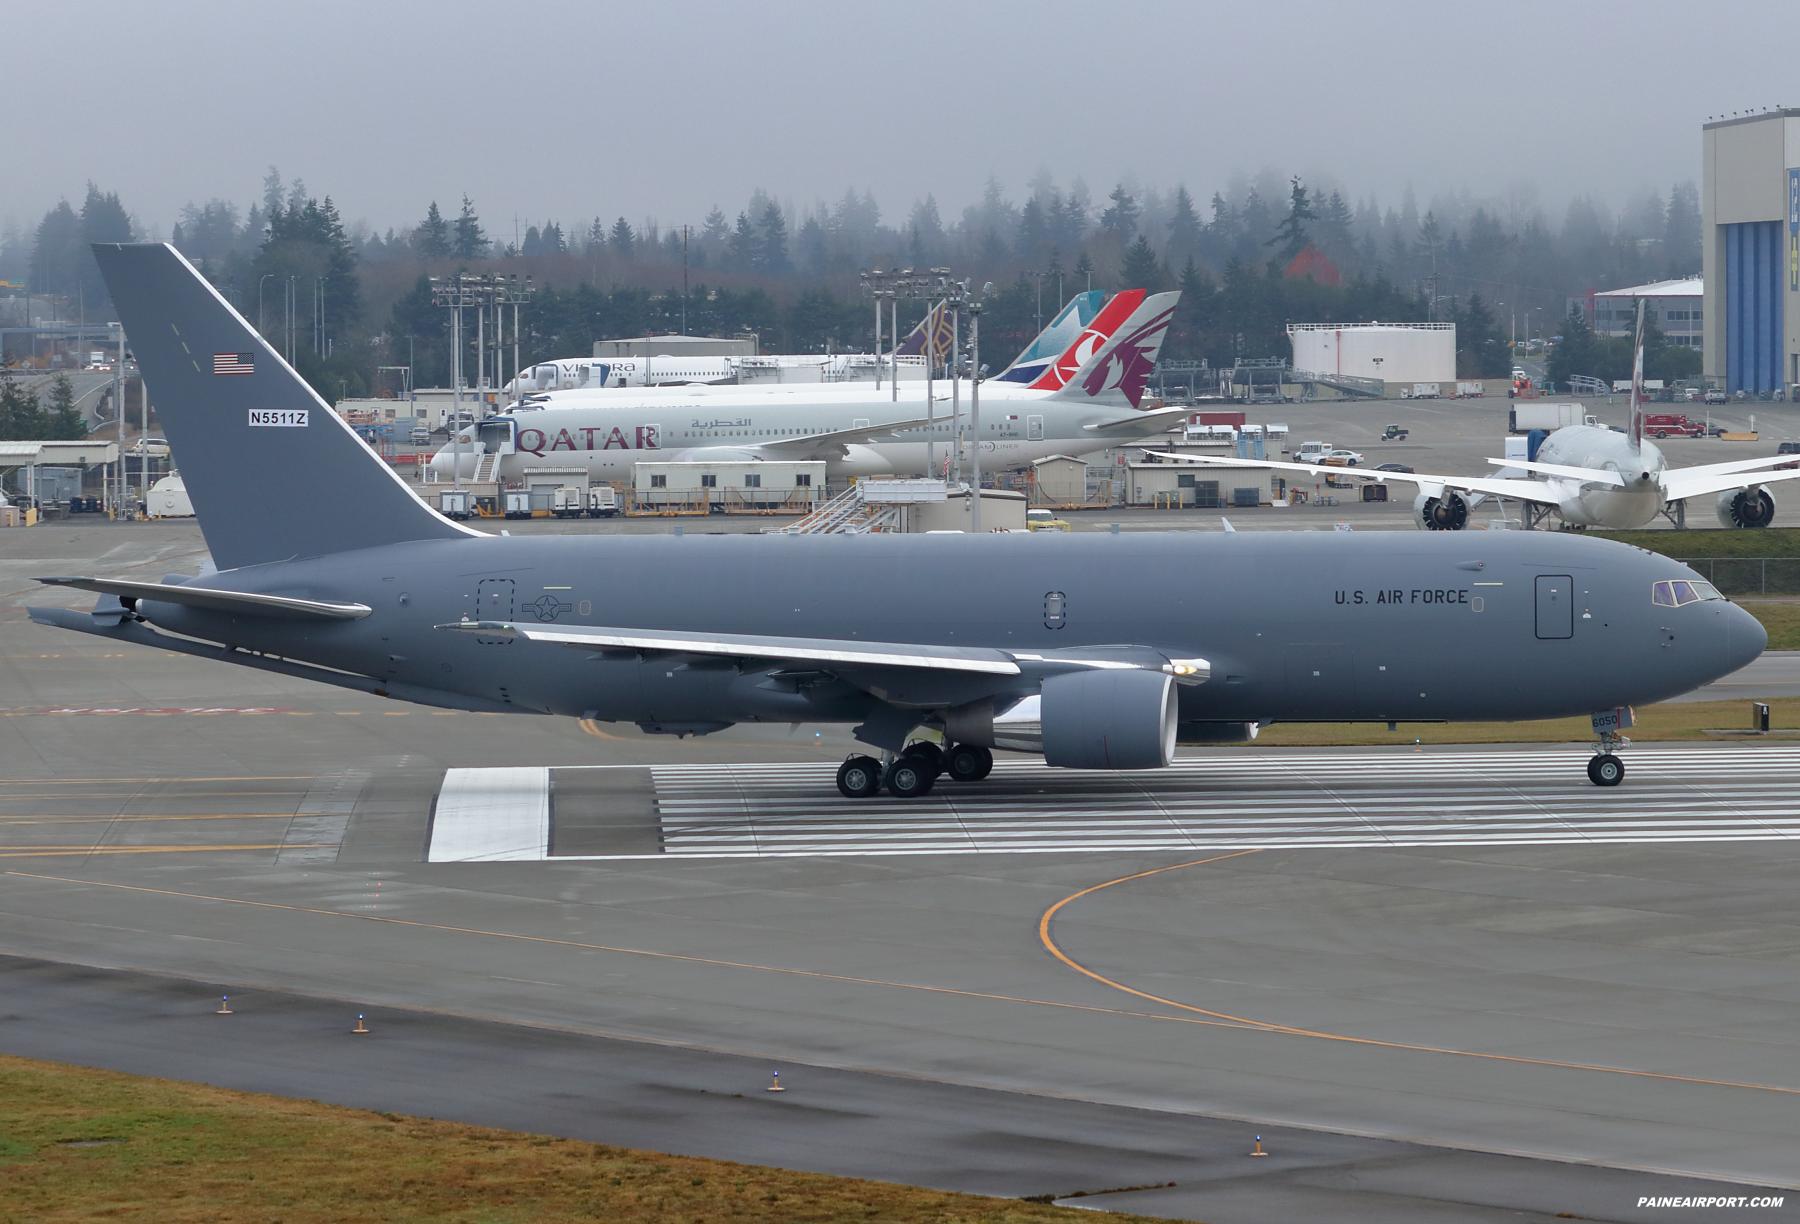 KC-46A 18-46050 at Paine Field